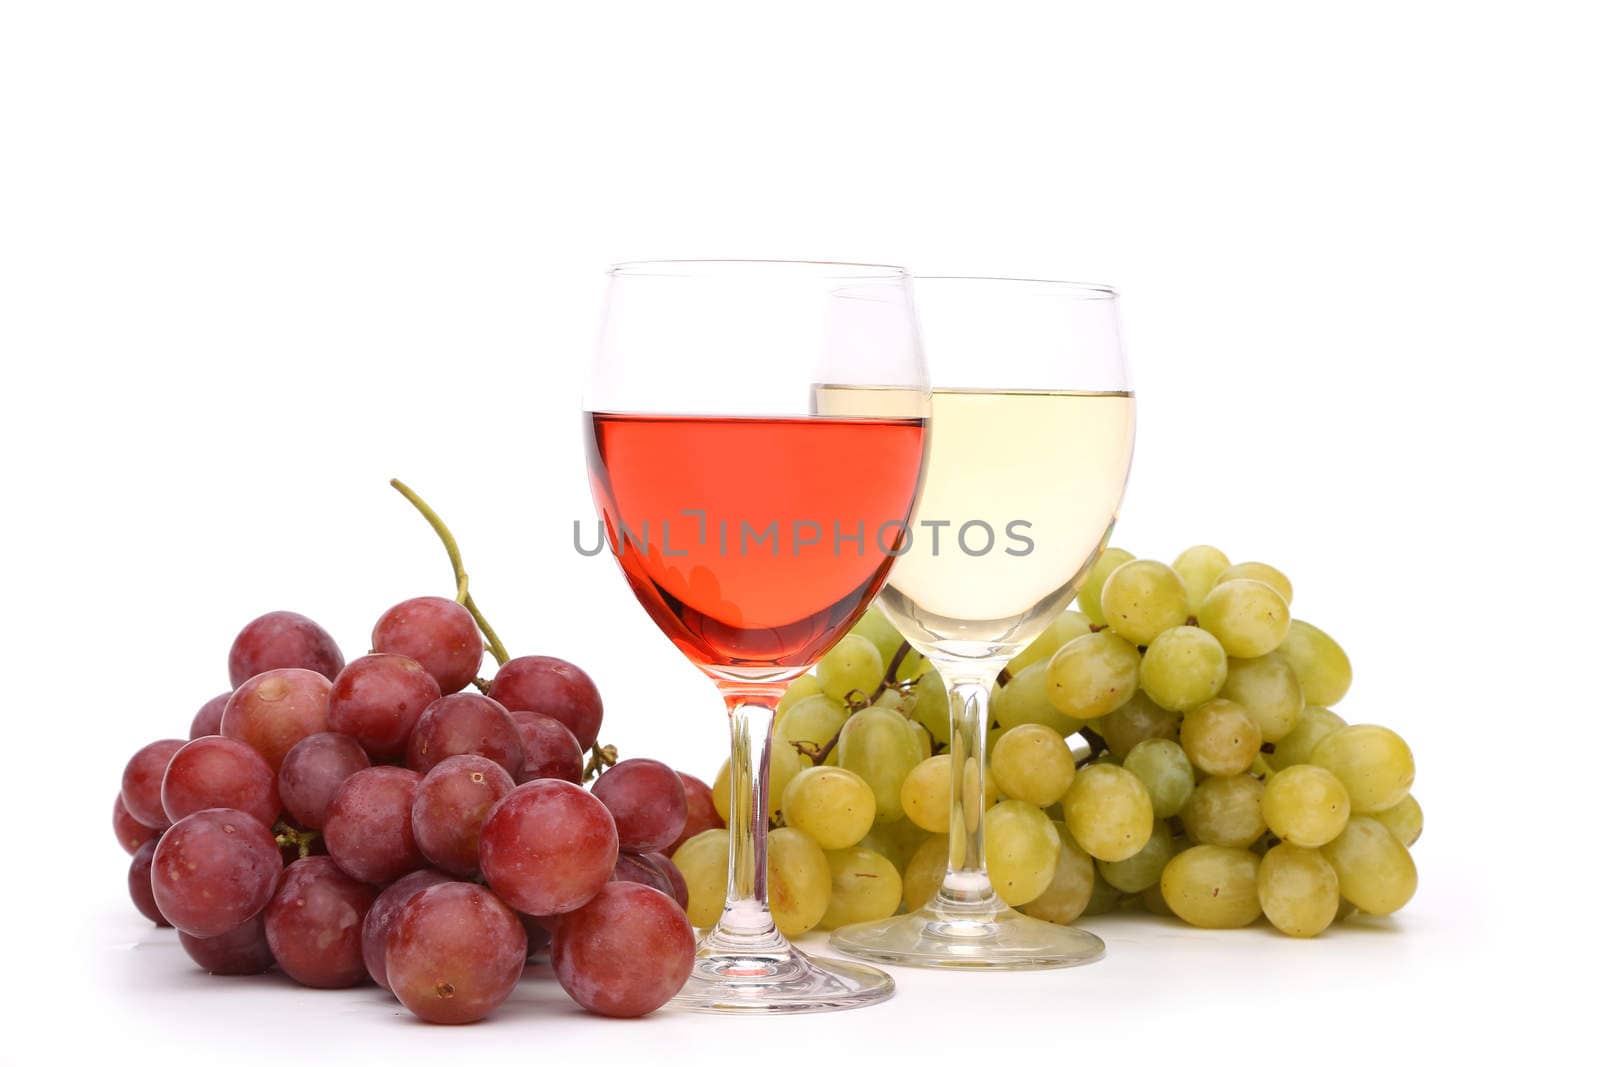 Two glass of wine and grapes by indigolotos